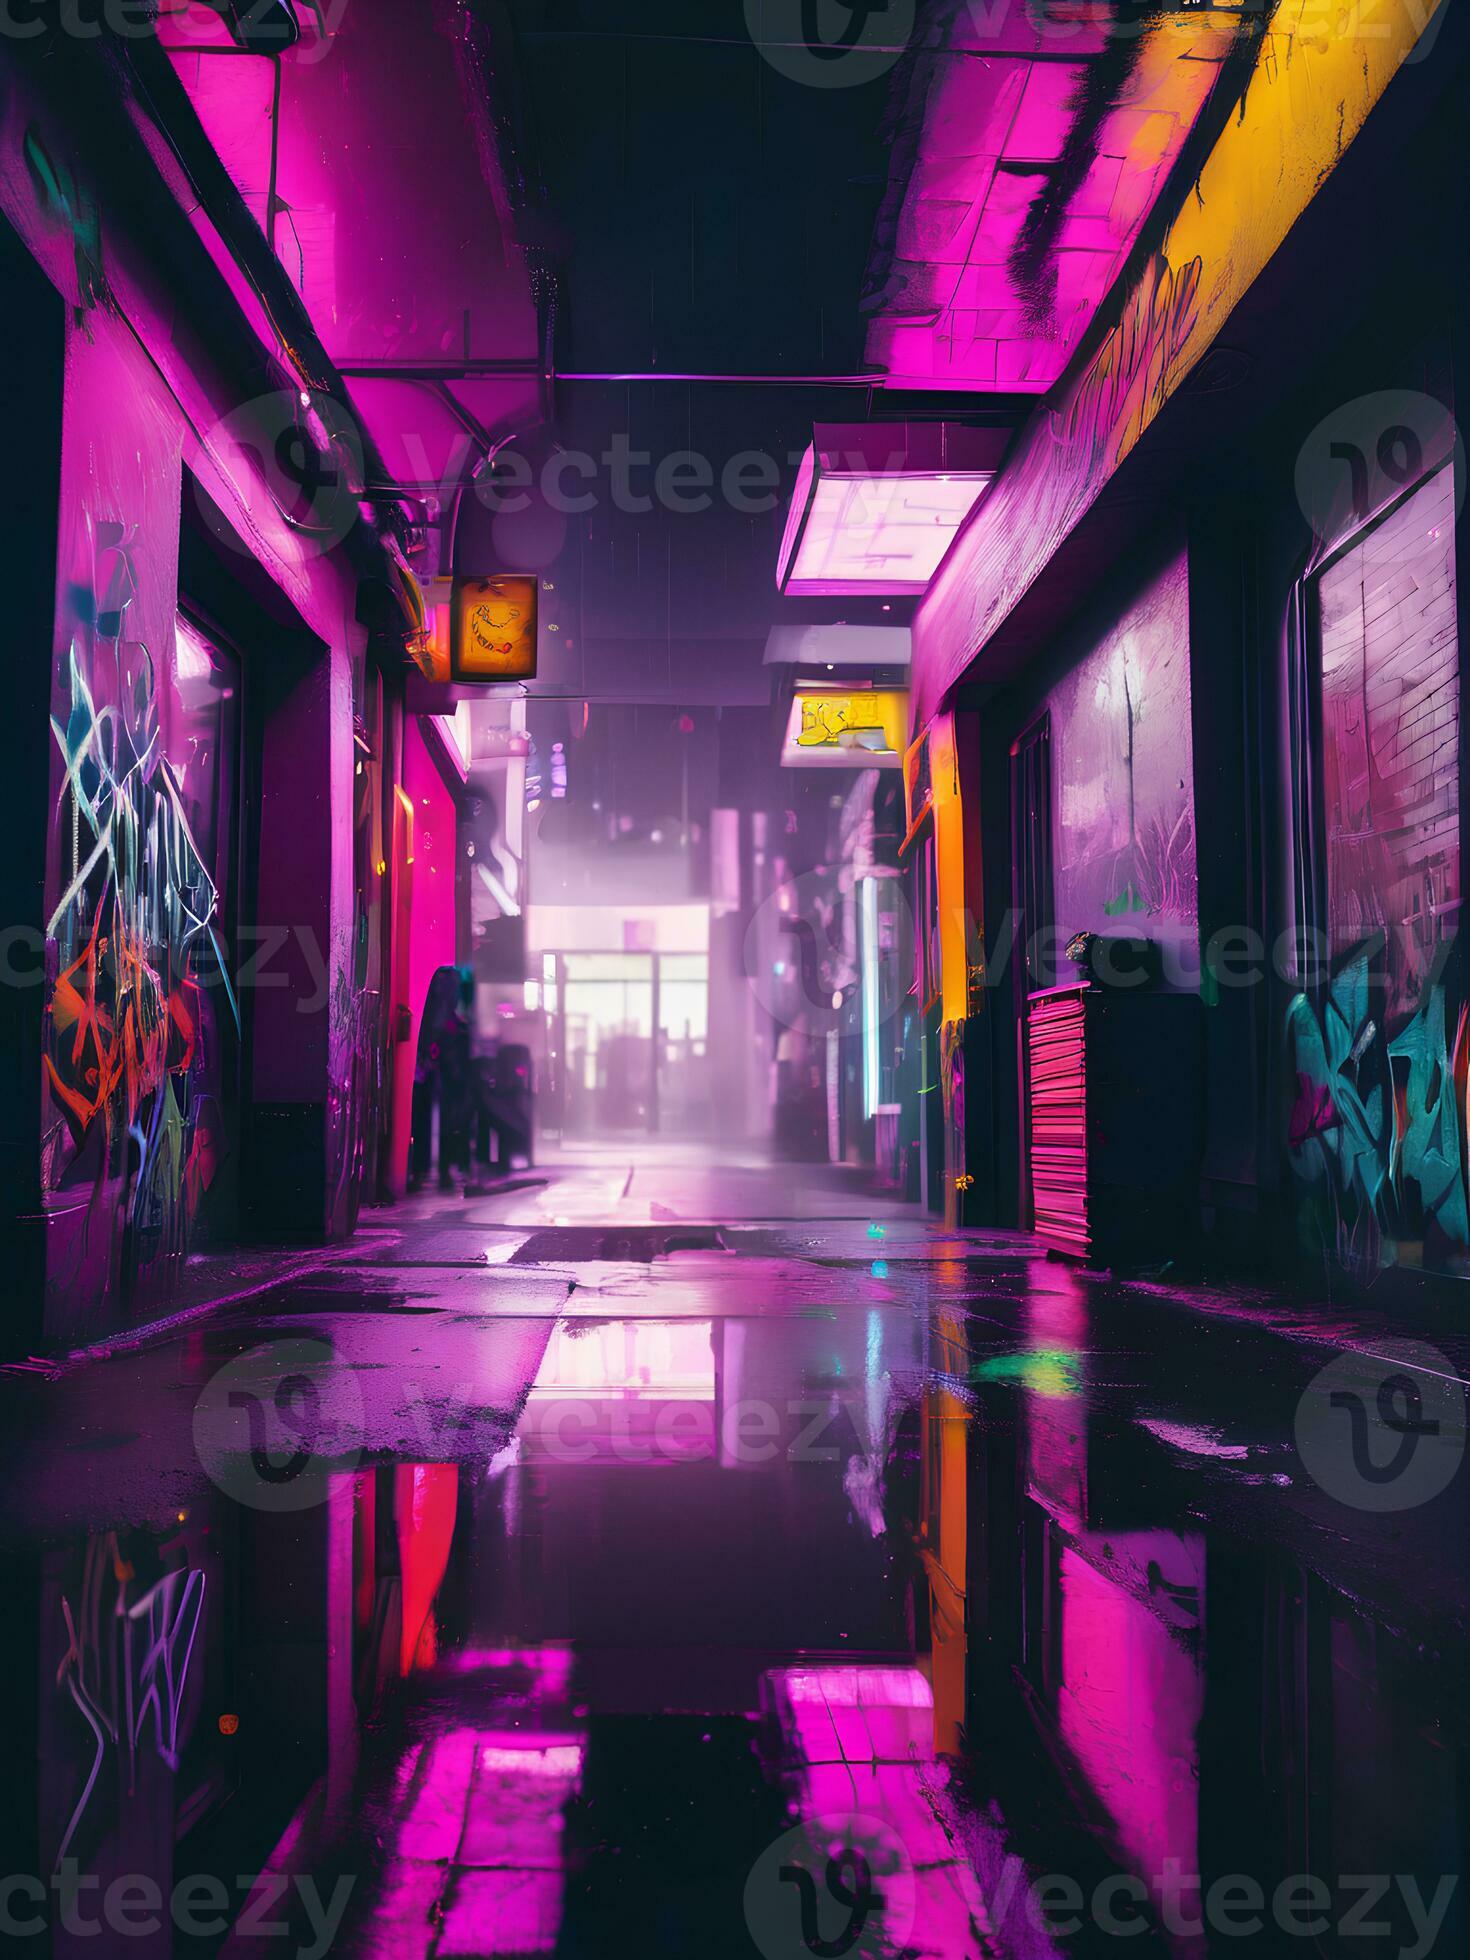 Cyberpunk 80s style street at night with neon lights and a rainy photo - Dark vaporwave